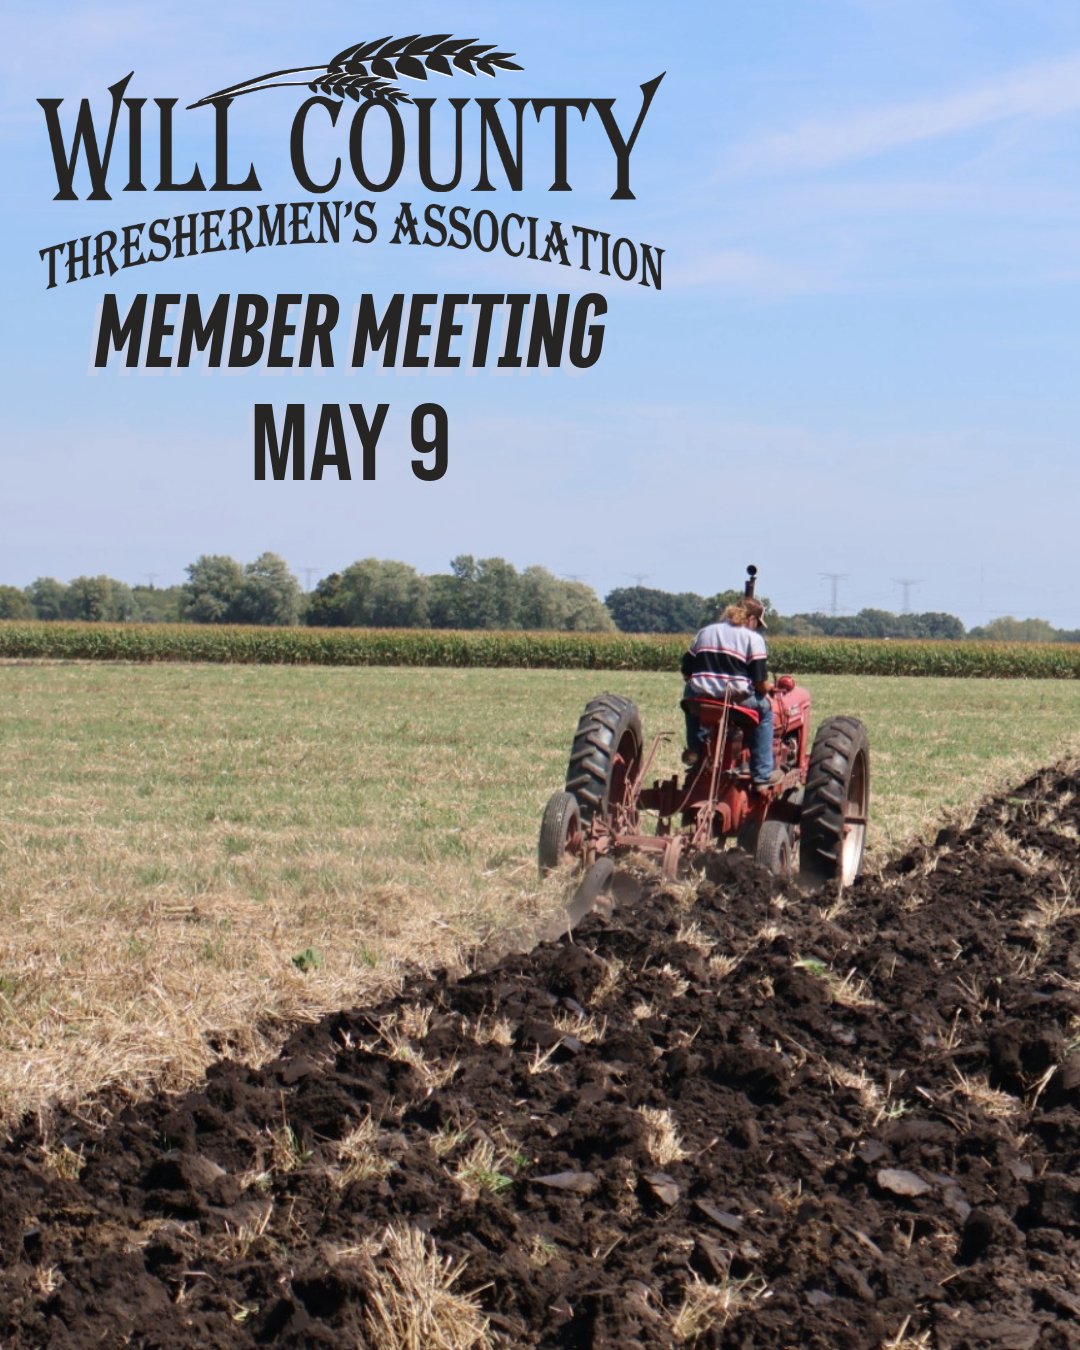 Our next meeting is Thursday, May 9th at 7:00pm. 
Location: Wilton Center Federated Church. 🌾 
WCTA holds monthly member meetings to discuss:
Association status
Upcoming events
Opportunities for members to get involved
Community news
and more!
🌾
Wo